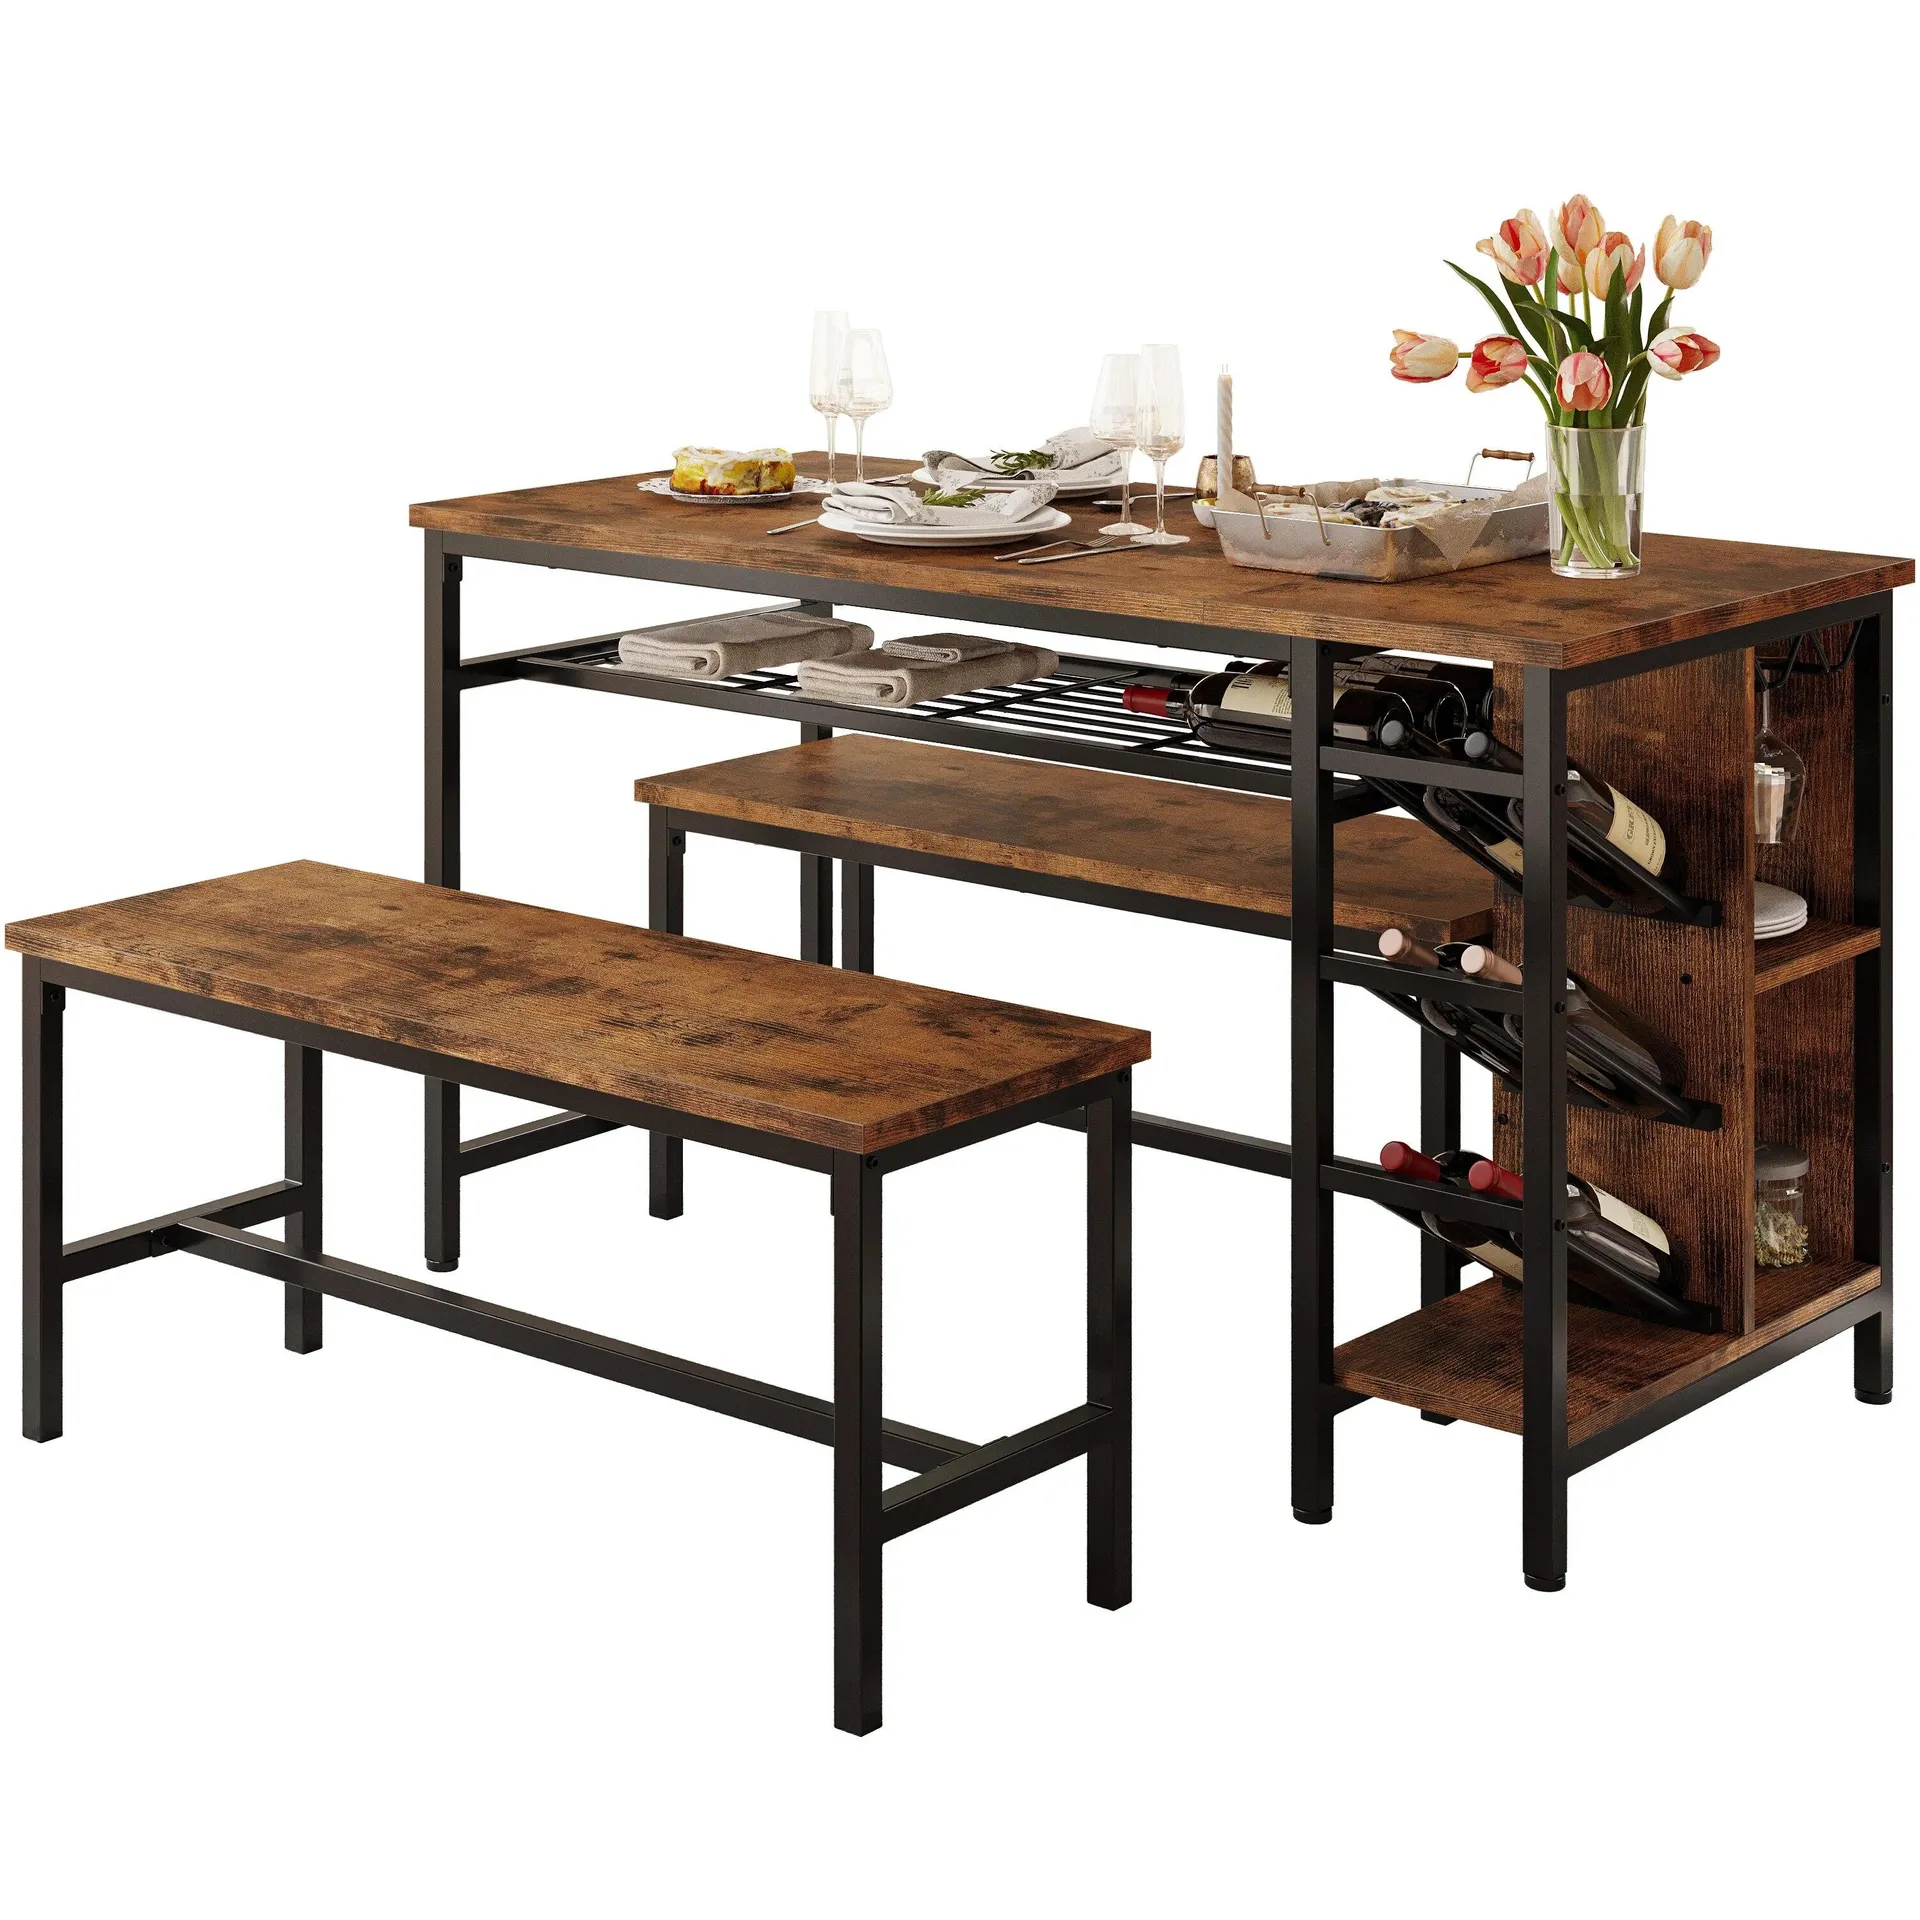 IRONCK Kitchen Table 47in, 3PC Dining Table Set with 2 Benches, Wine Rack and Glass Holder, Space-Saving Dinette